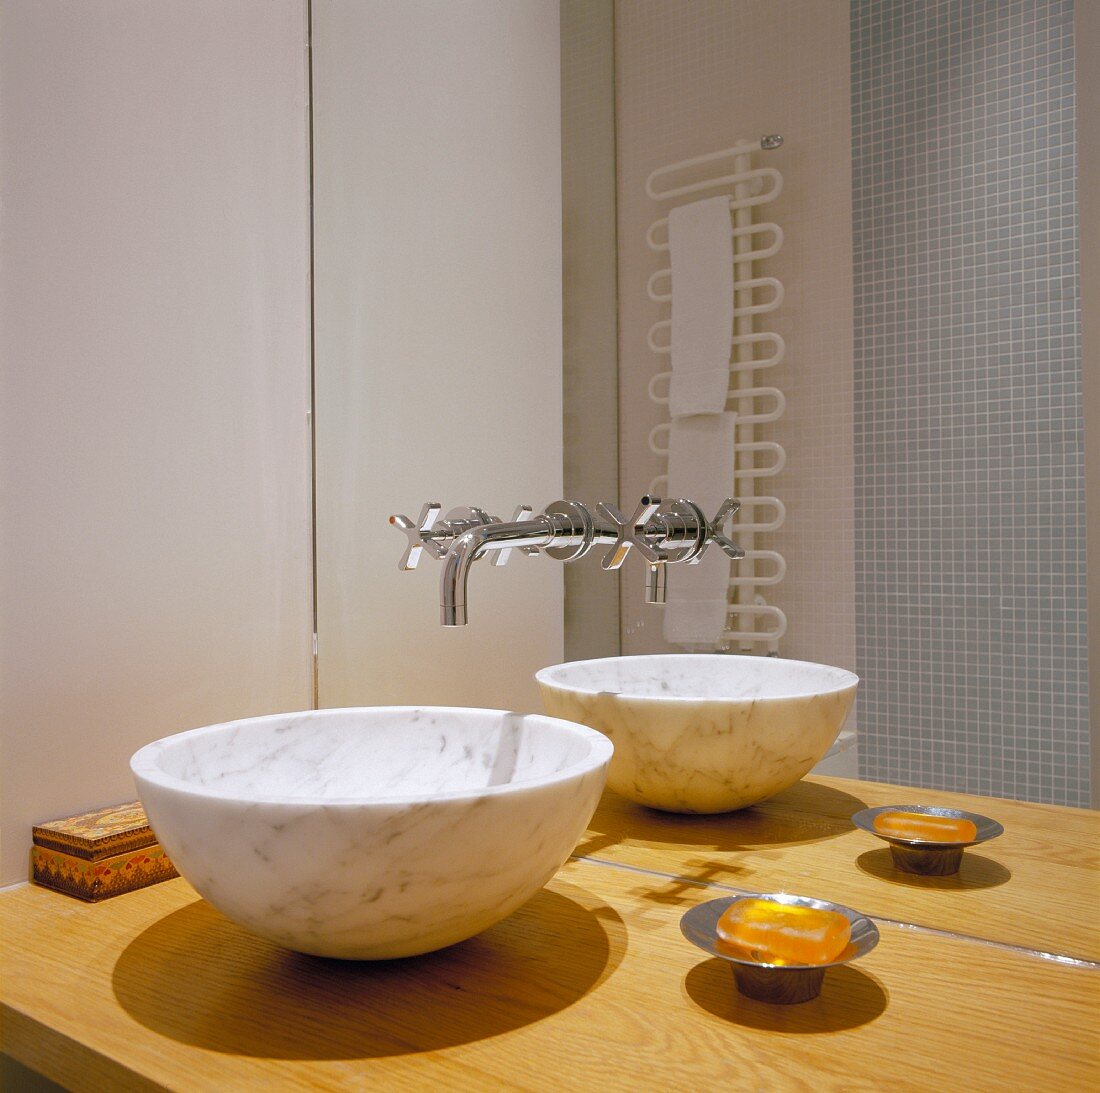 Marble wash basin on a wooden countertop and designer fittings from the mirrored wall